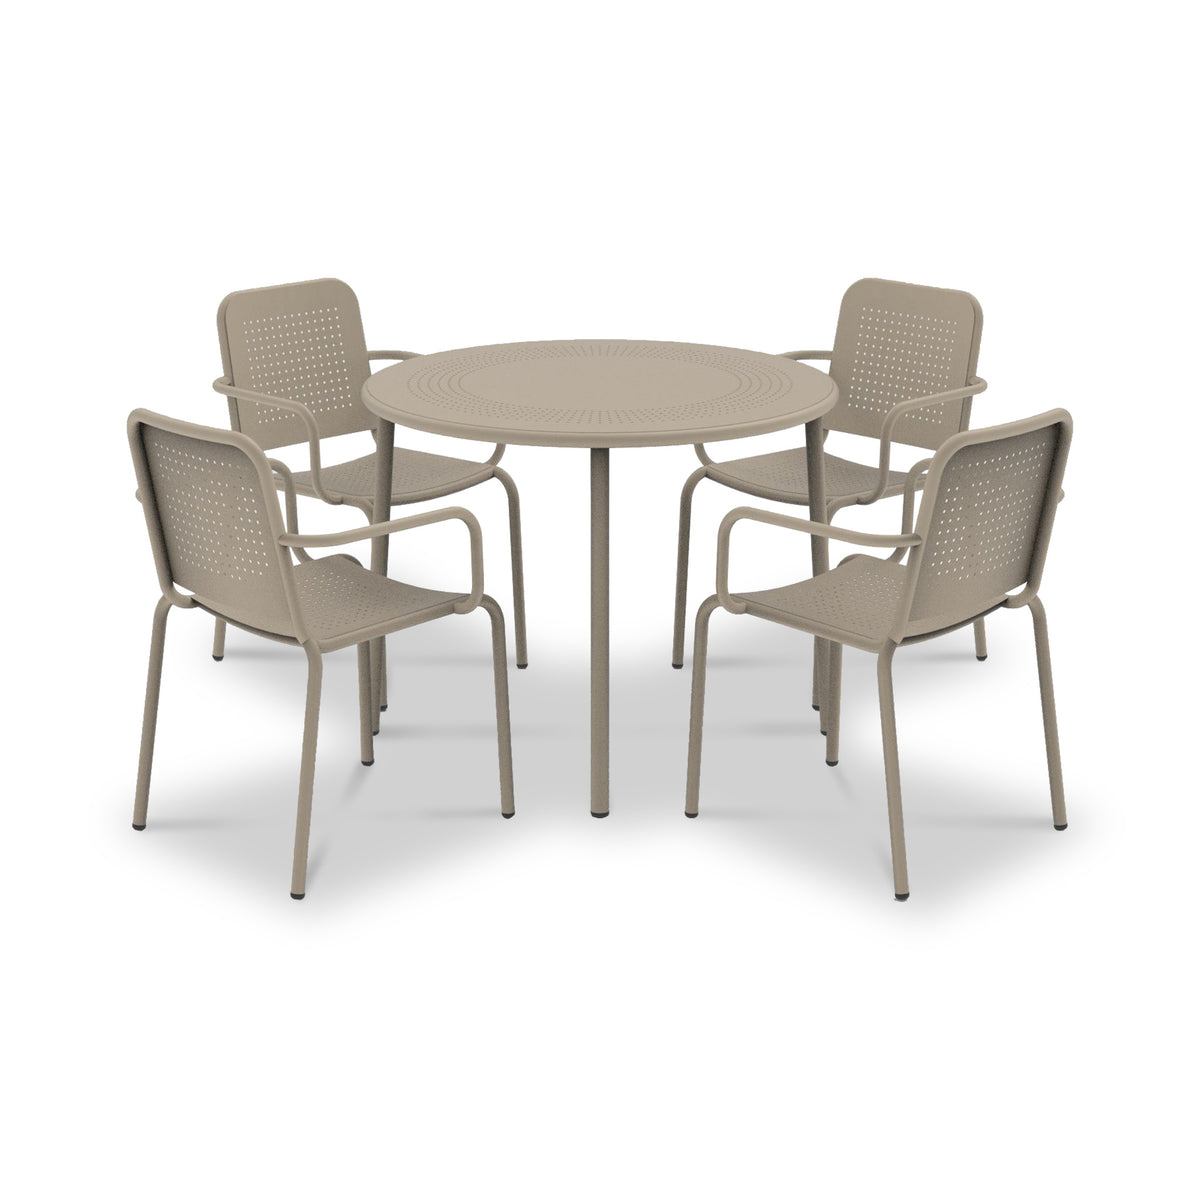 Porto Champagne 4 Seater Round Dining Set from Roseland Furniture